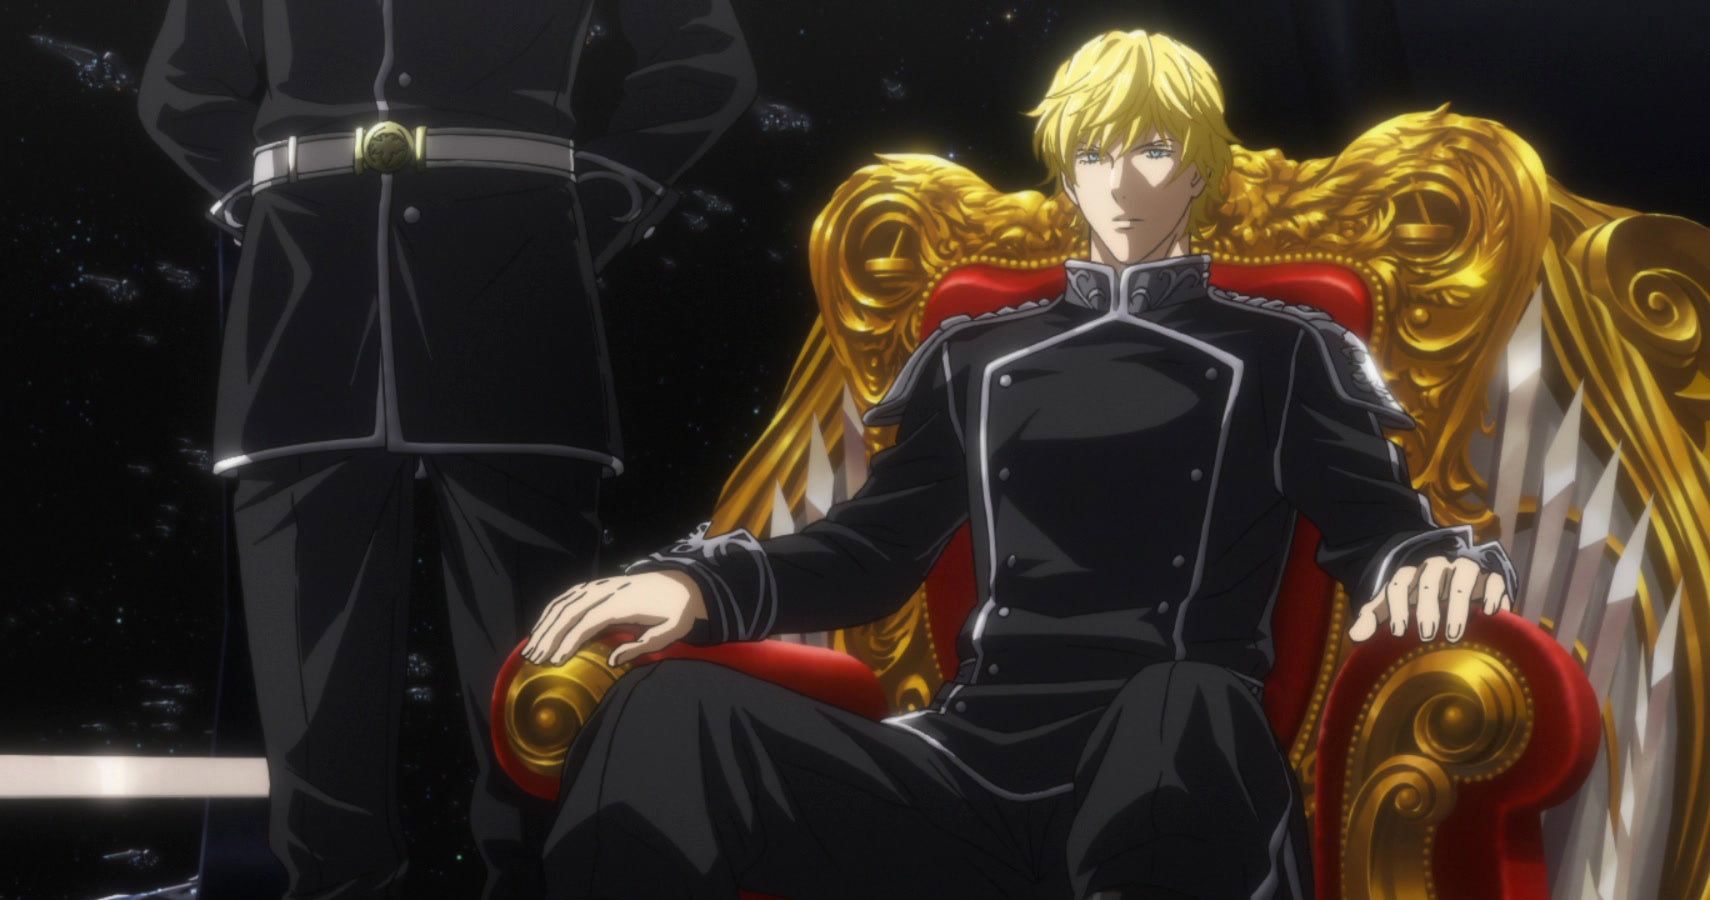 Best Order To Watch Legend Of The Galactic Heroes Anime